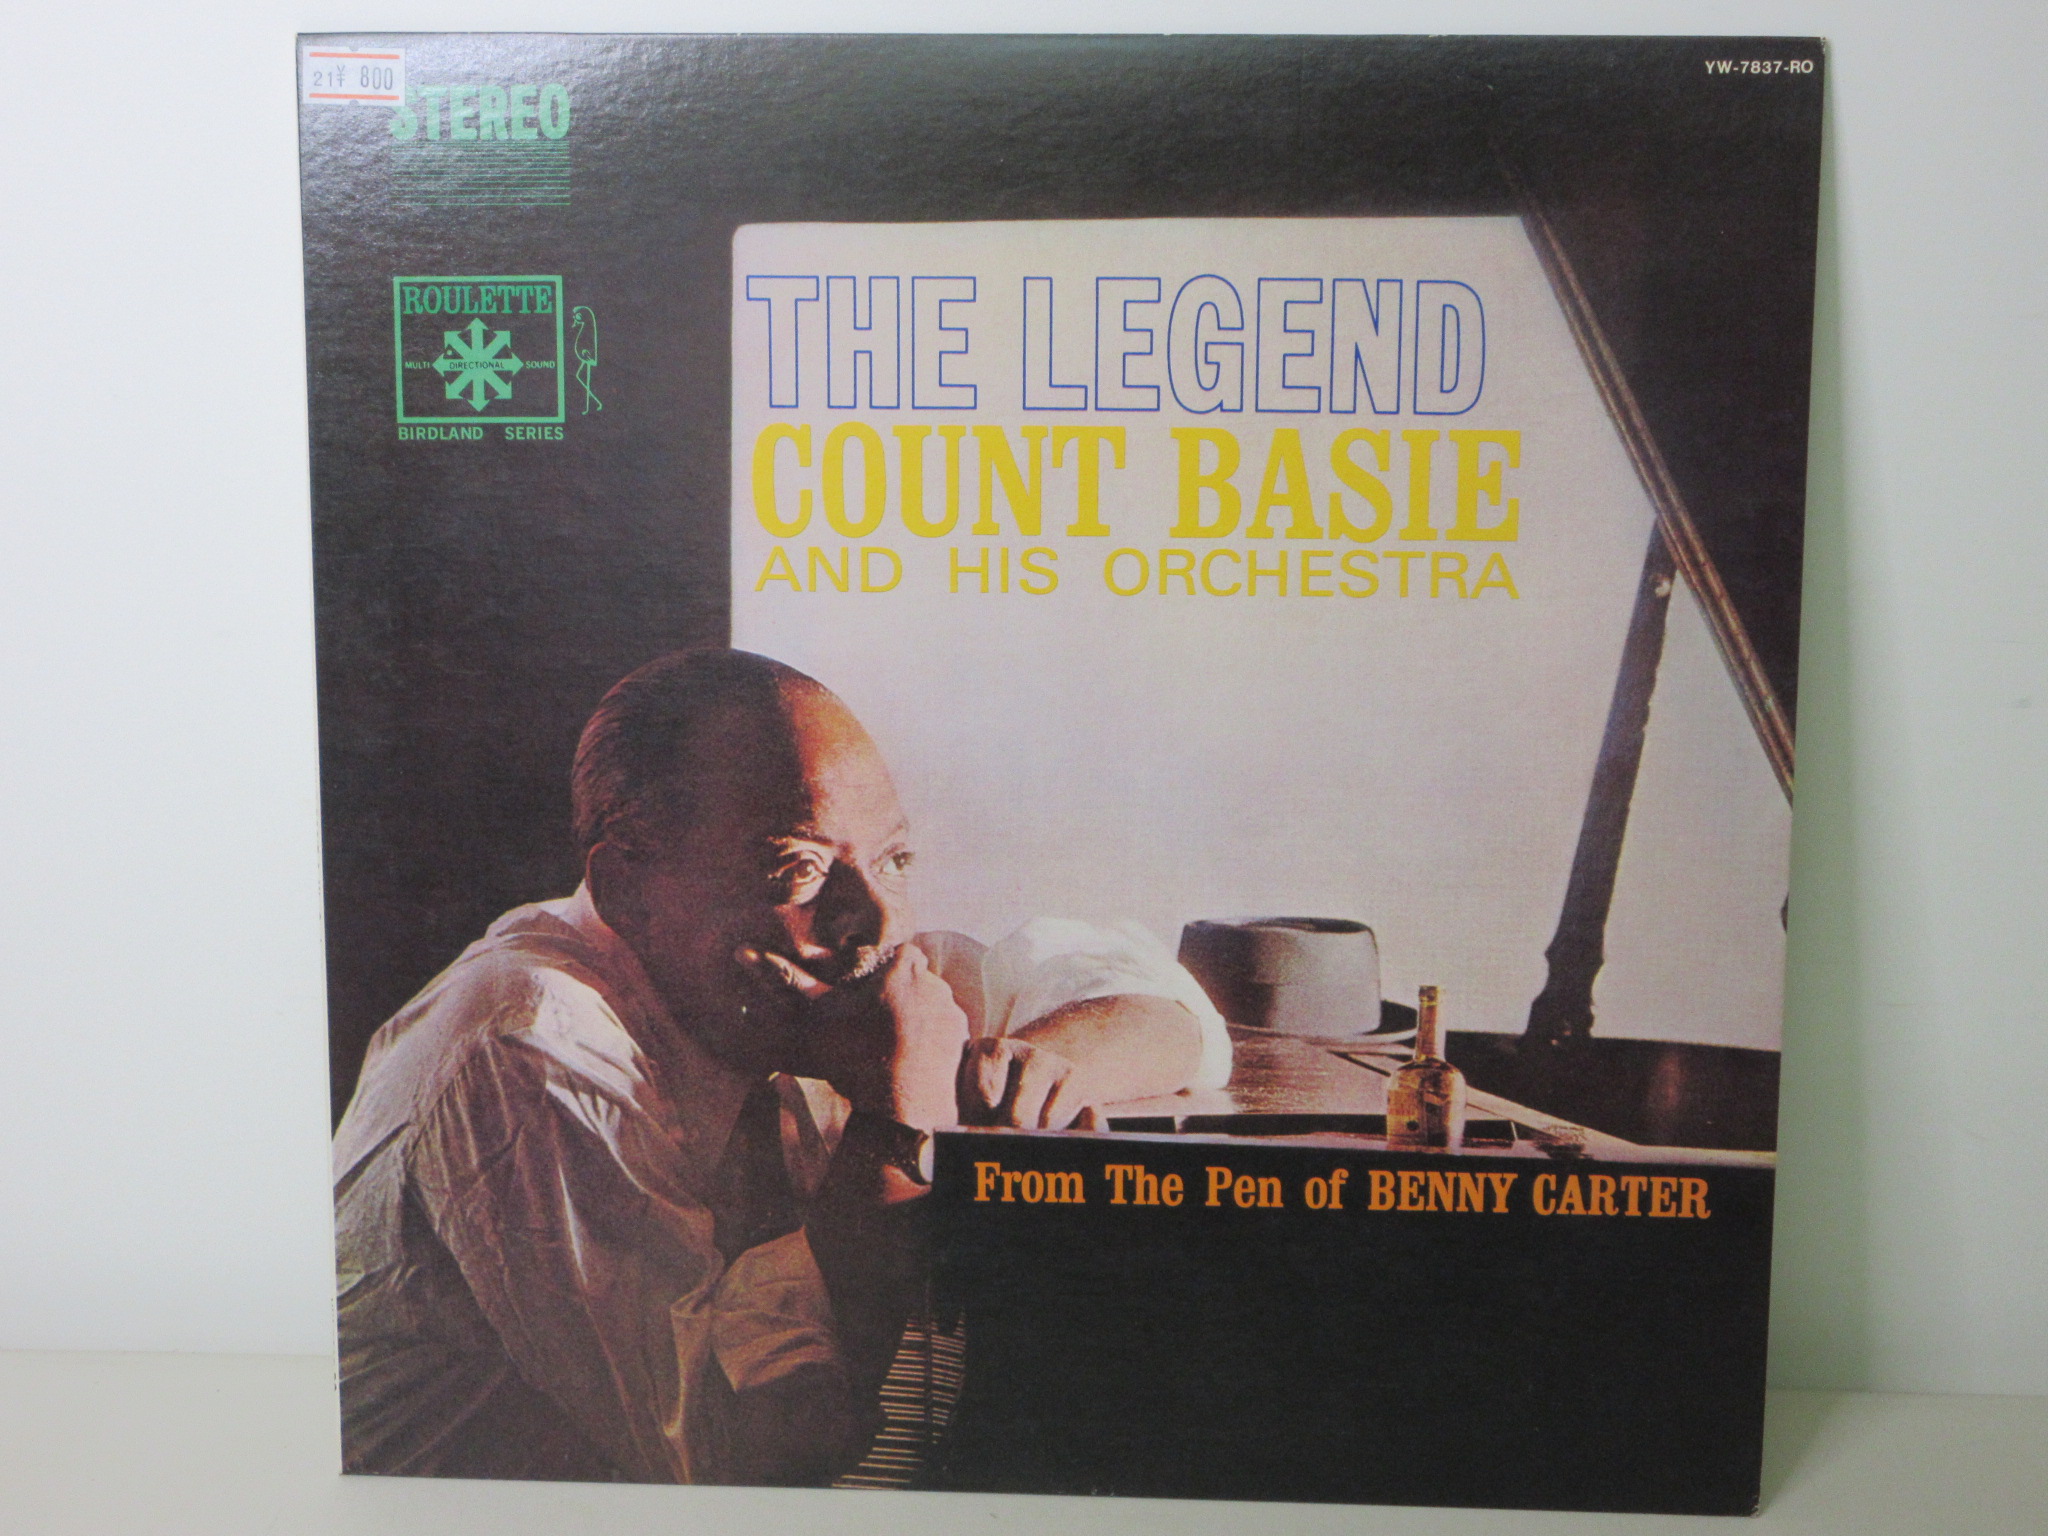 Count Basie & His Orchestra, Count Basie - The Legend - From The Pen Of Benny Carter [YW-7837-RO]